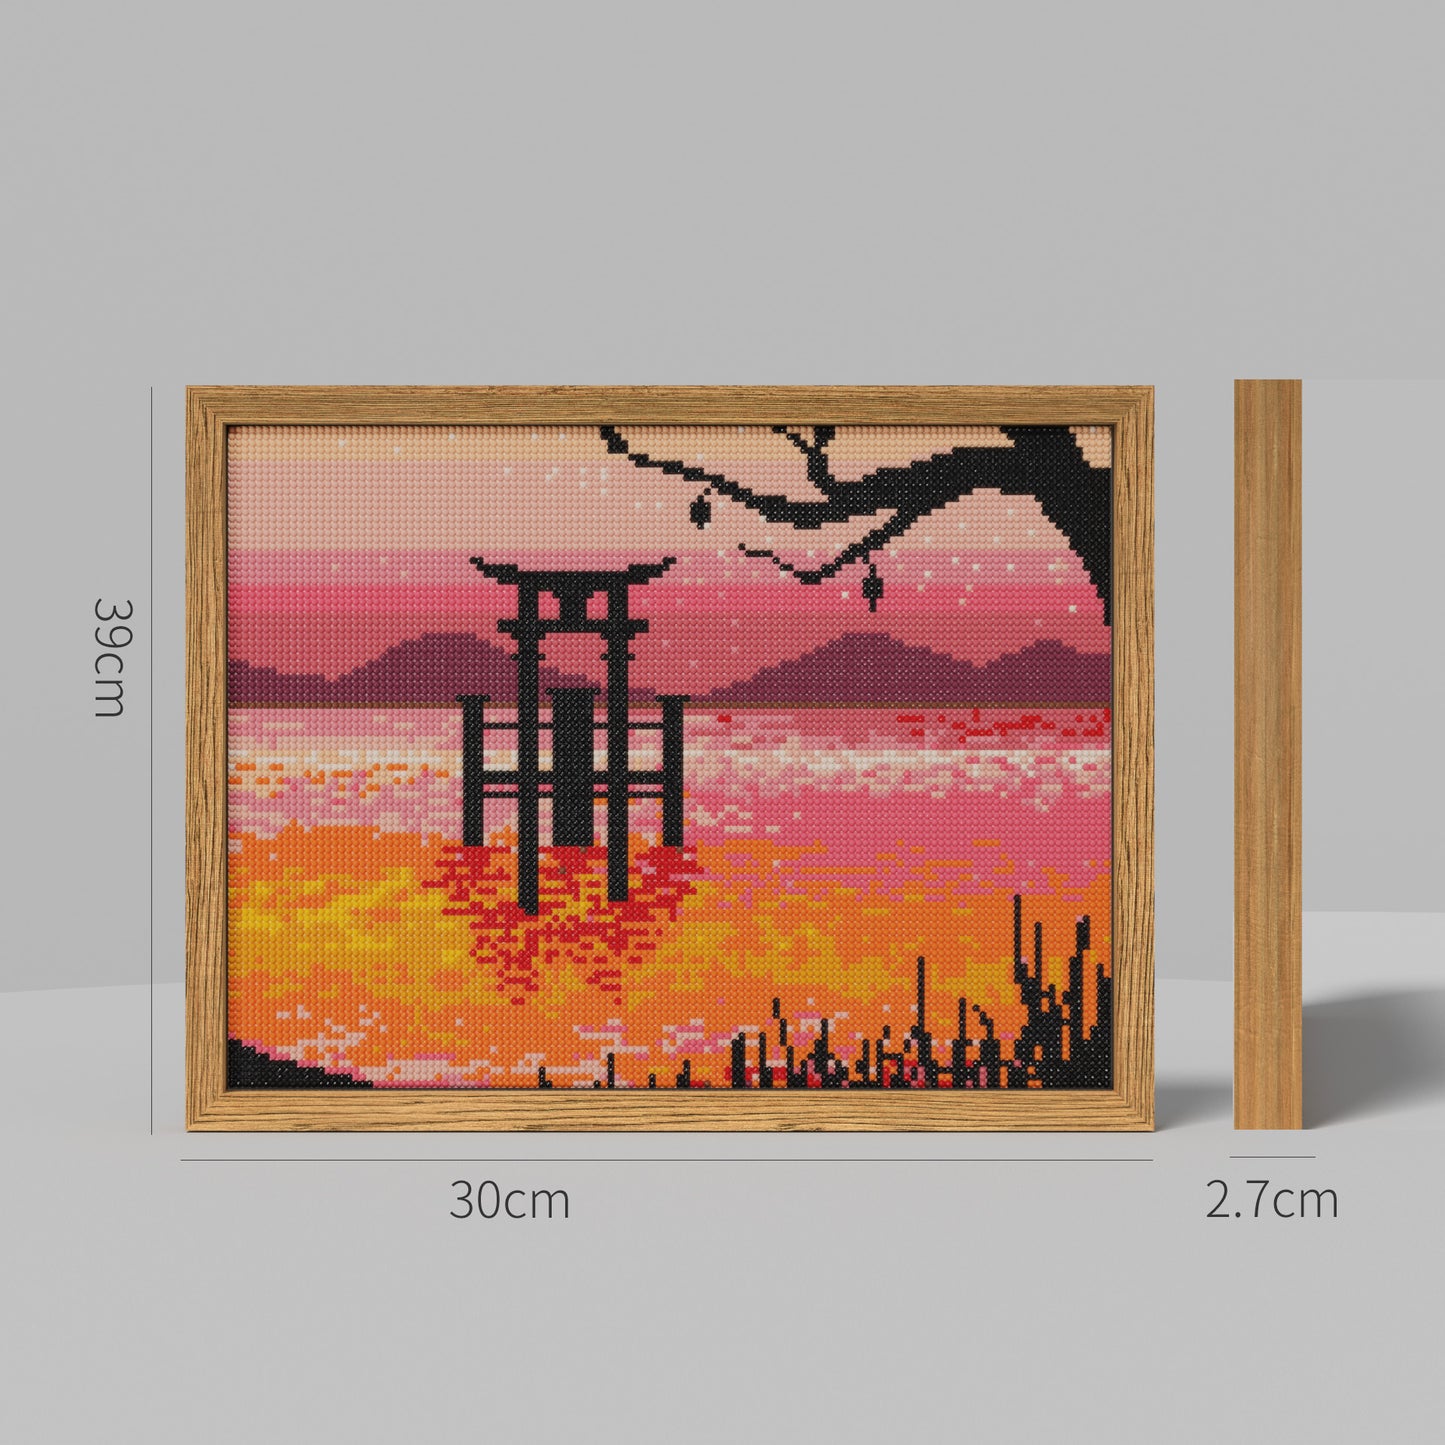 The Lake Surface Glitters in the Sunset, Landscape Theme Diamond Painting, 128*96 Dots, 26 Faces ABS Diamond, Elegant Solid Wood Frame